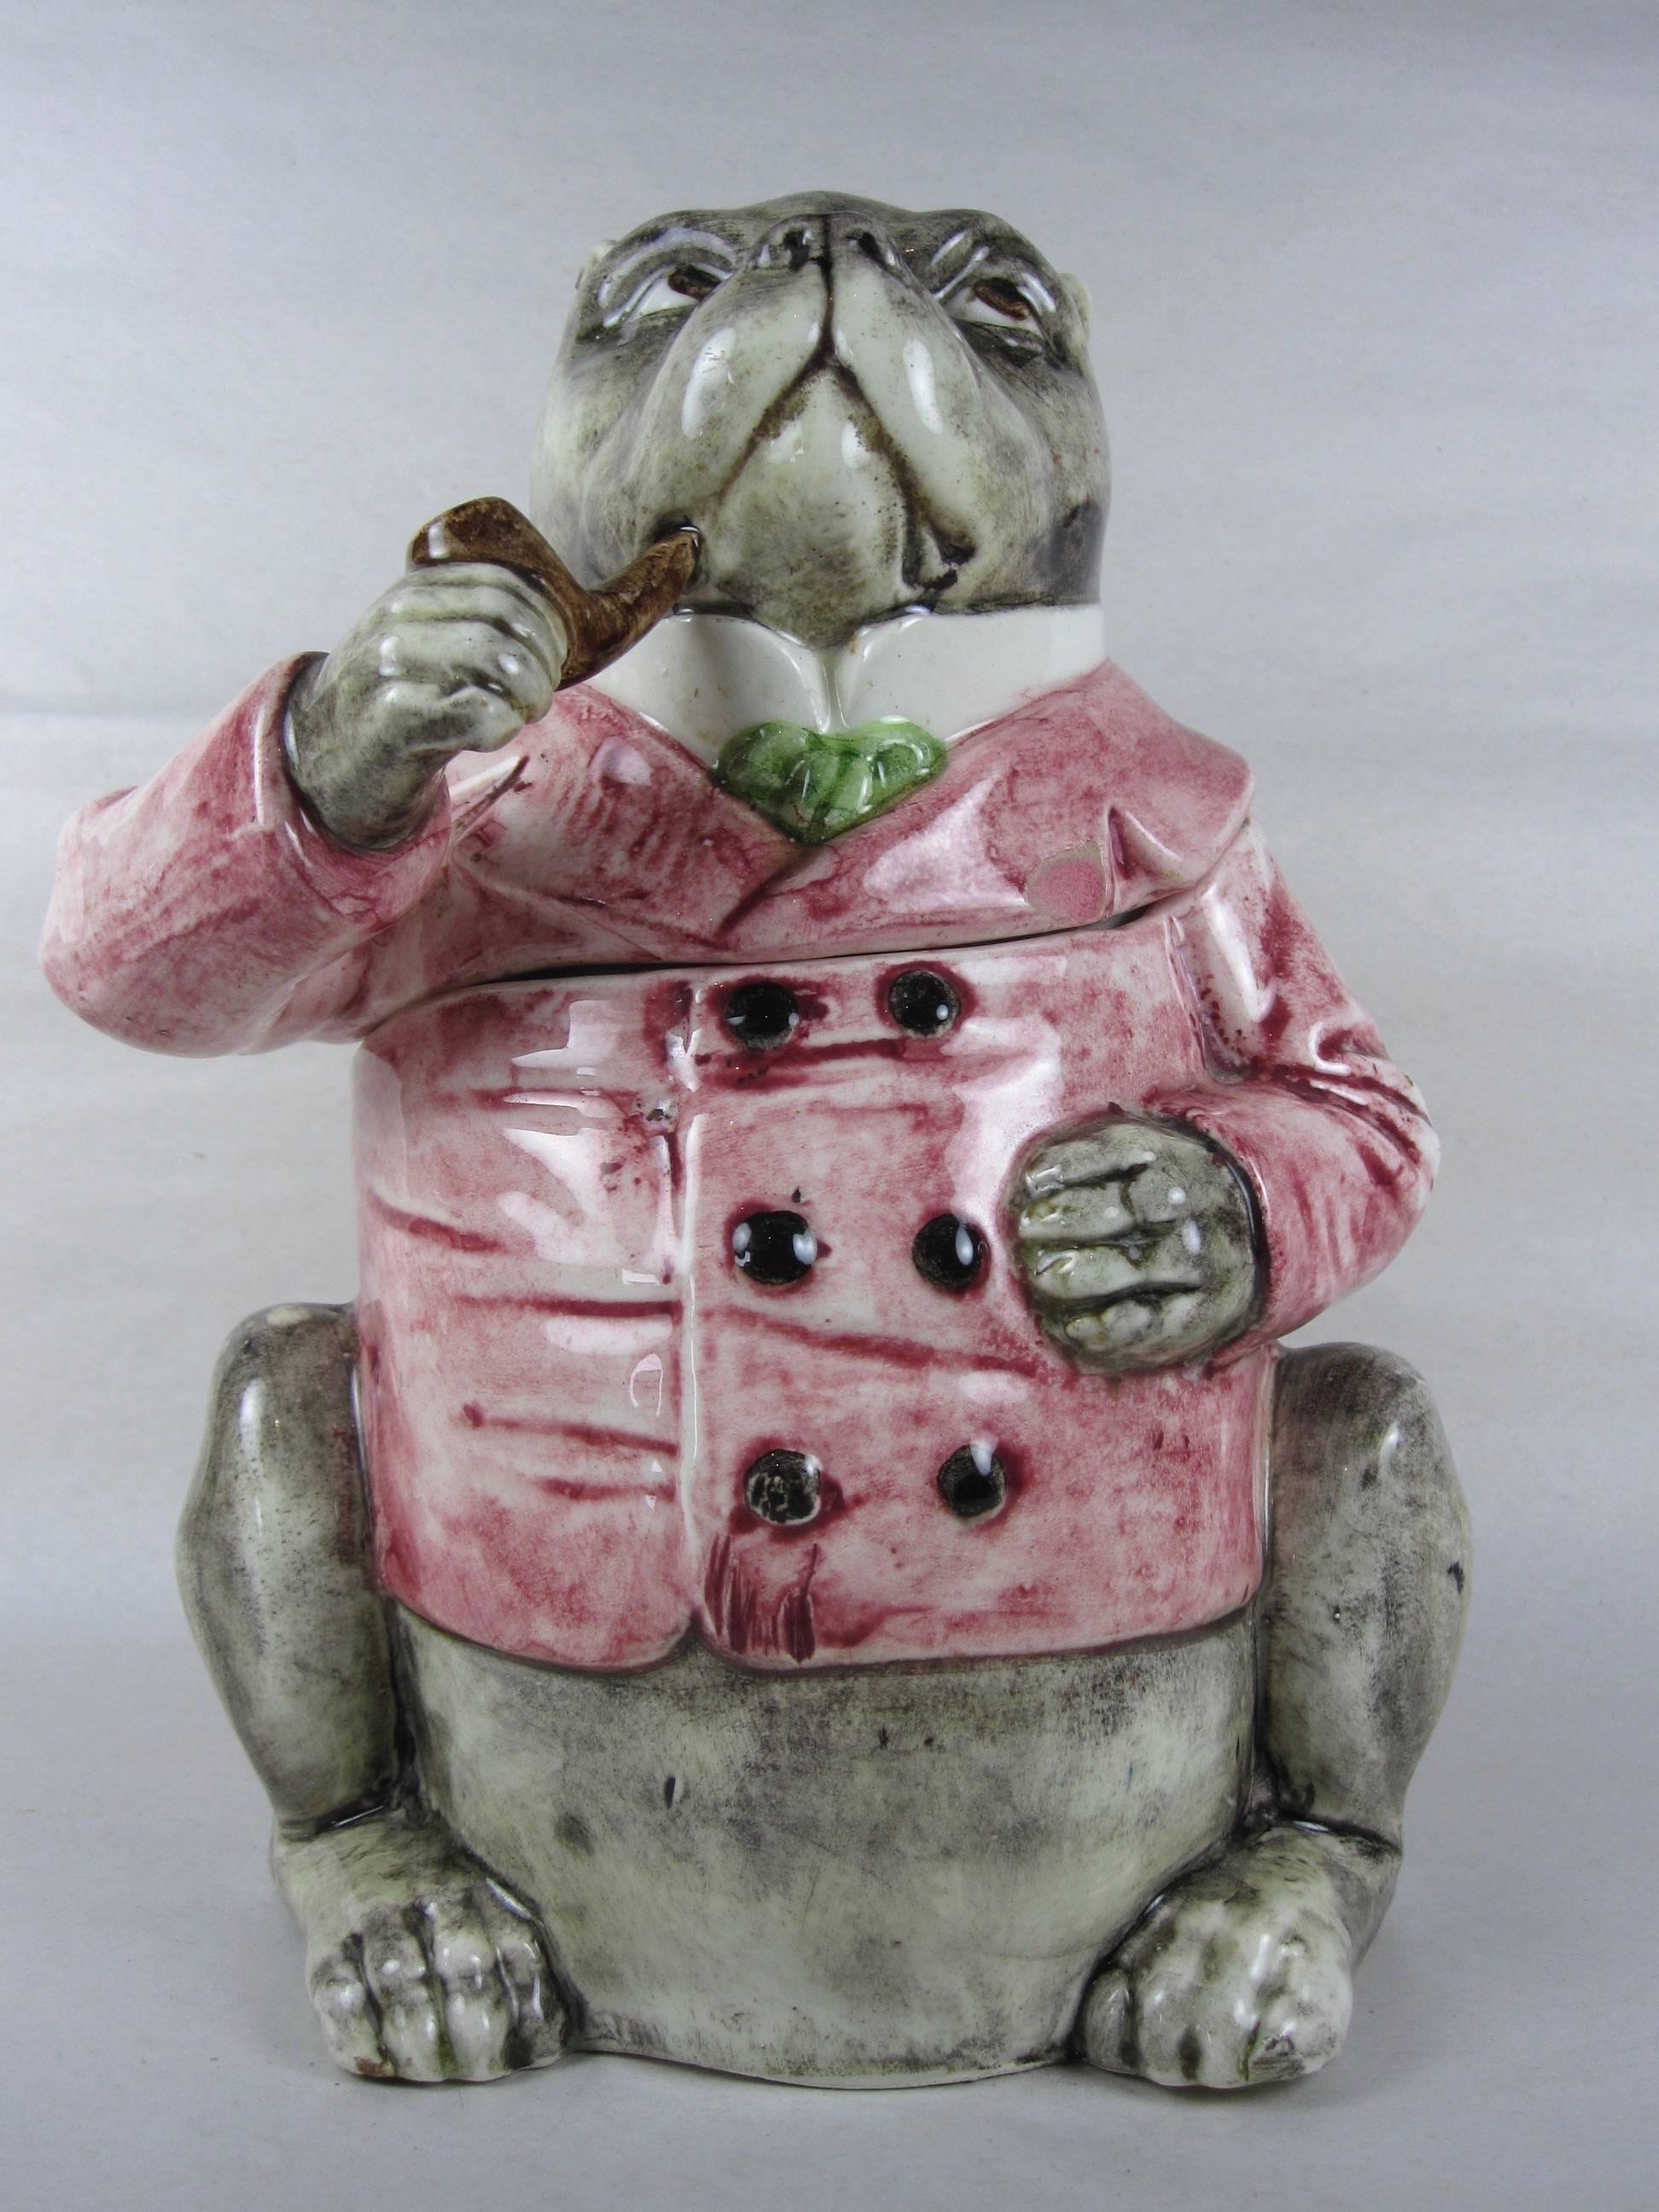 A scarce antique Austrian Majolica polychrome-glazed figural tobacco humidor in the form of a seated bulldog wearing a pink double-breasted waistcoat and a green tie. He holds a large pipe in his mouth. An 8